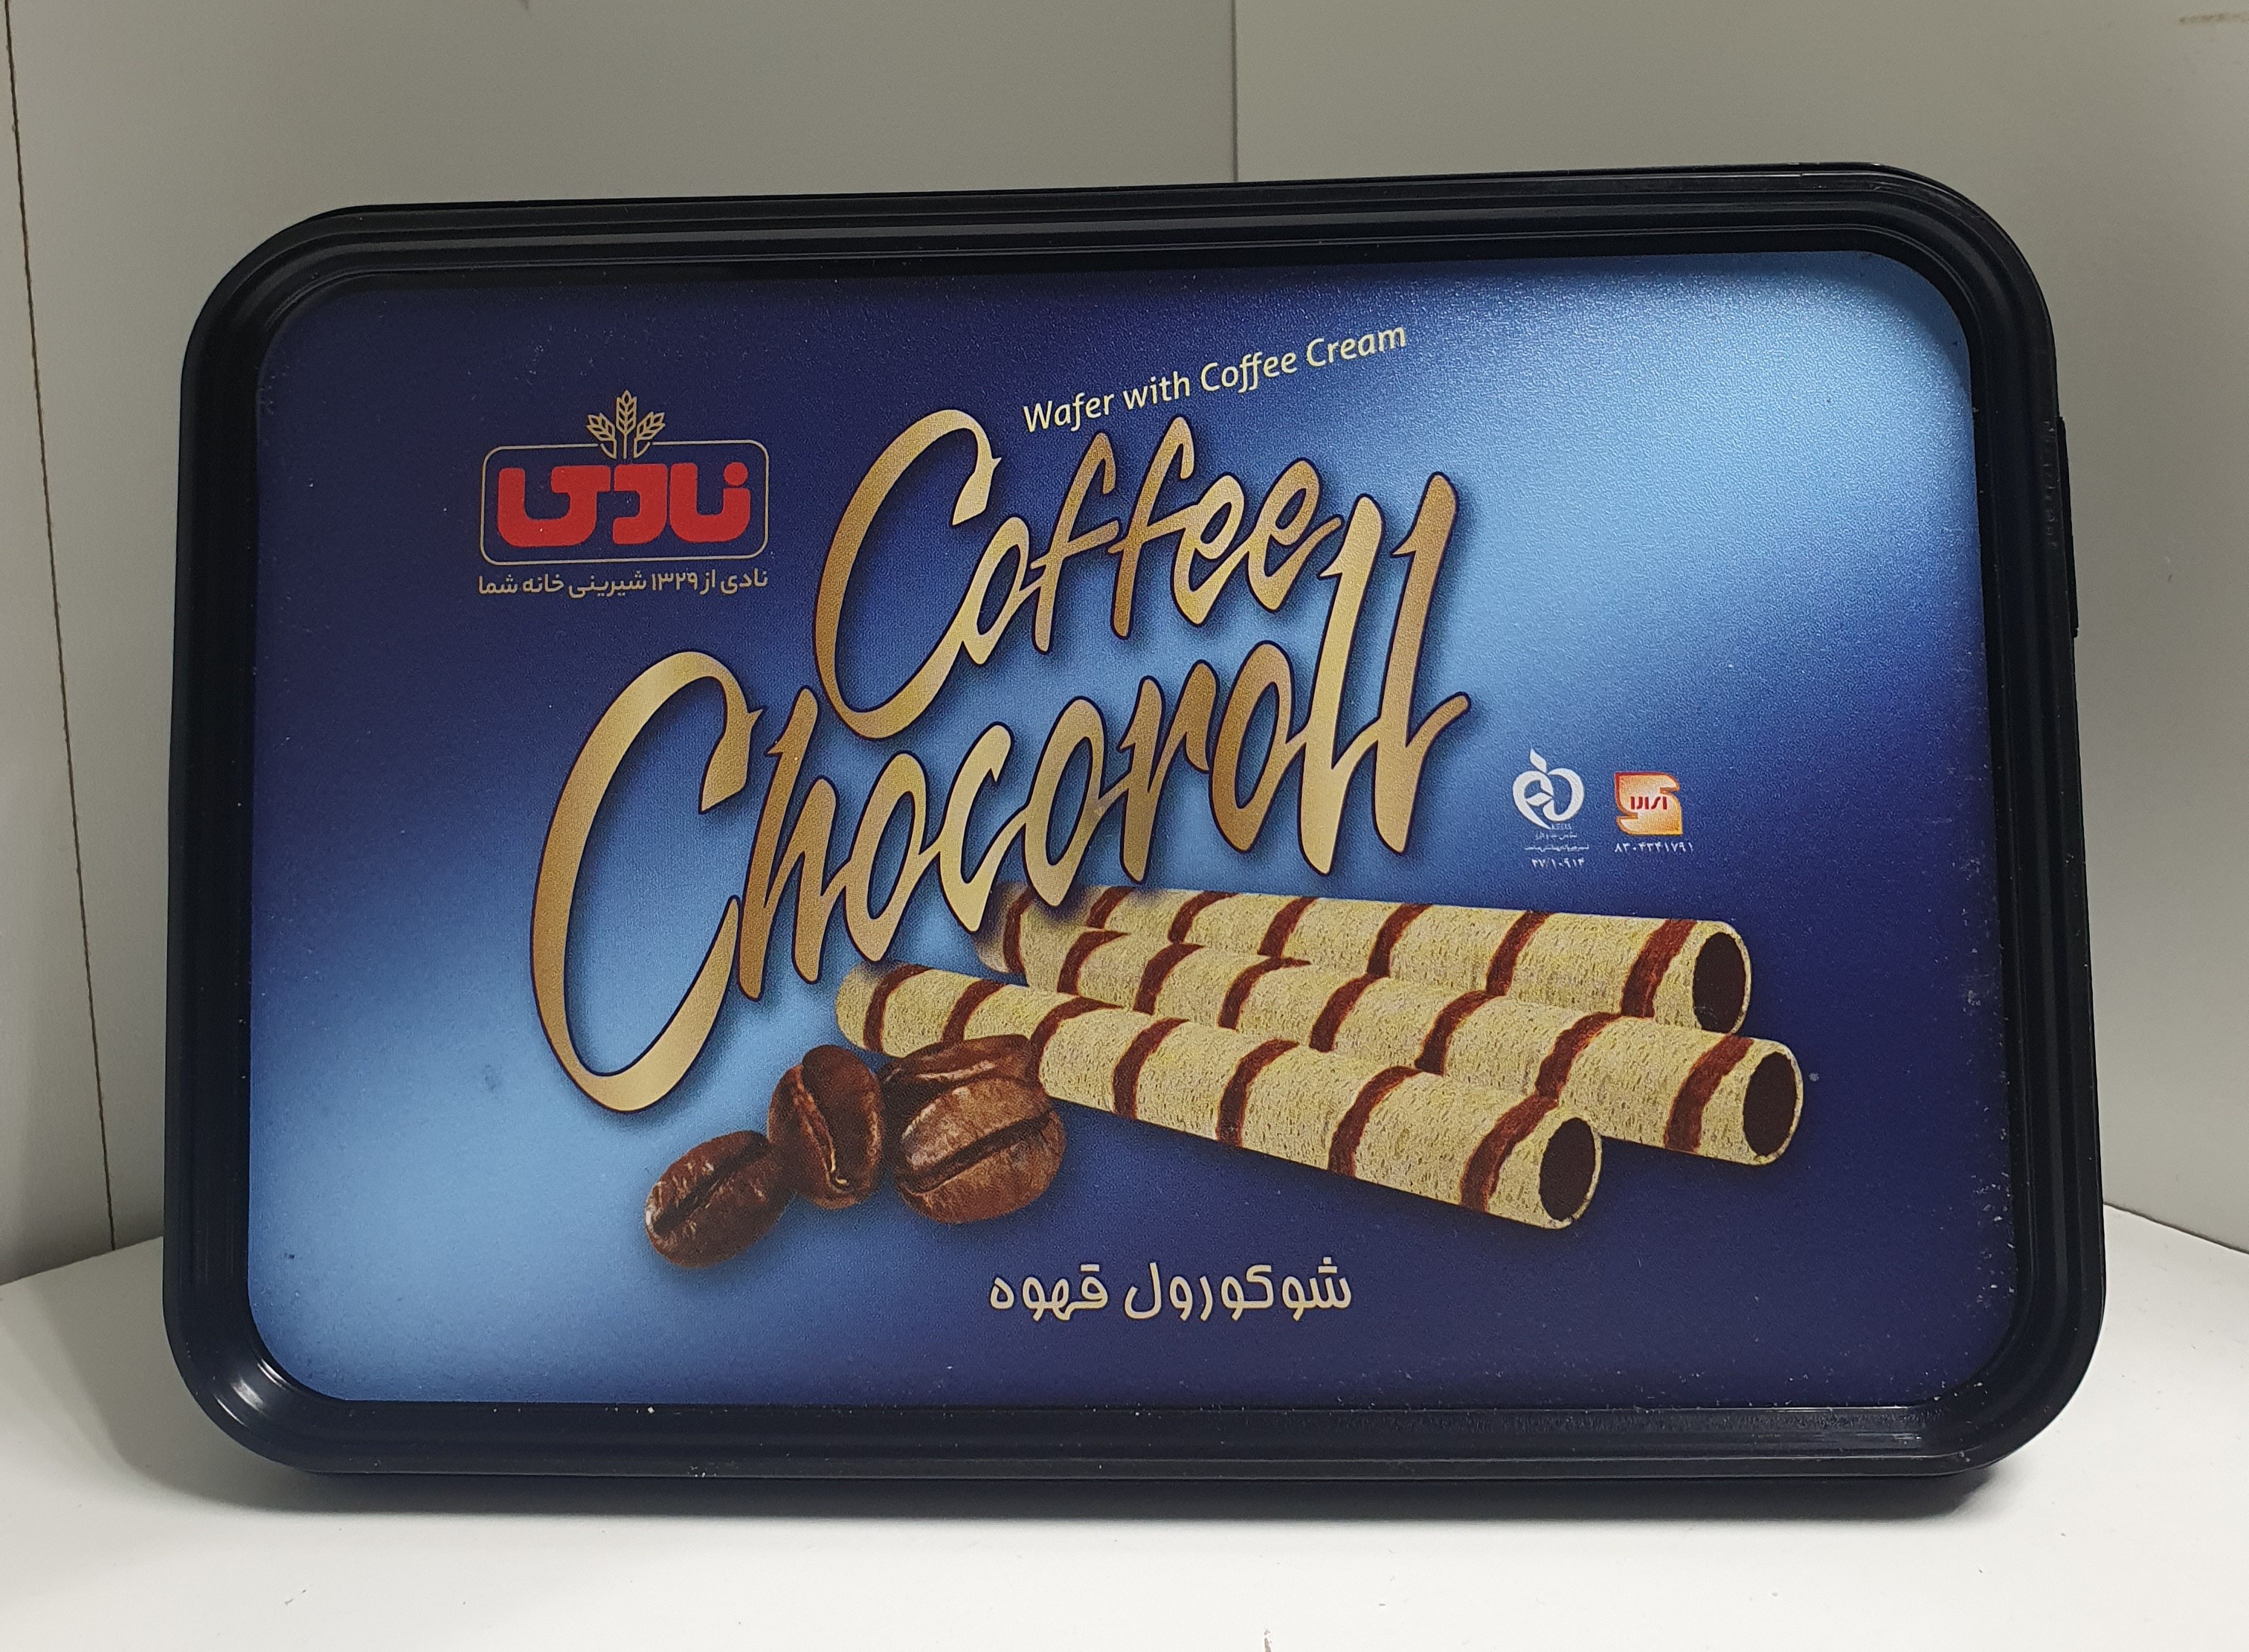 (FOOD) Wafer with Coffee Cream (1×250G)